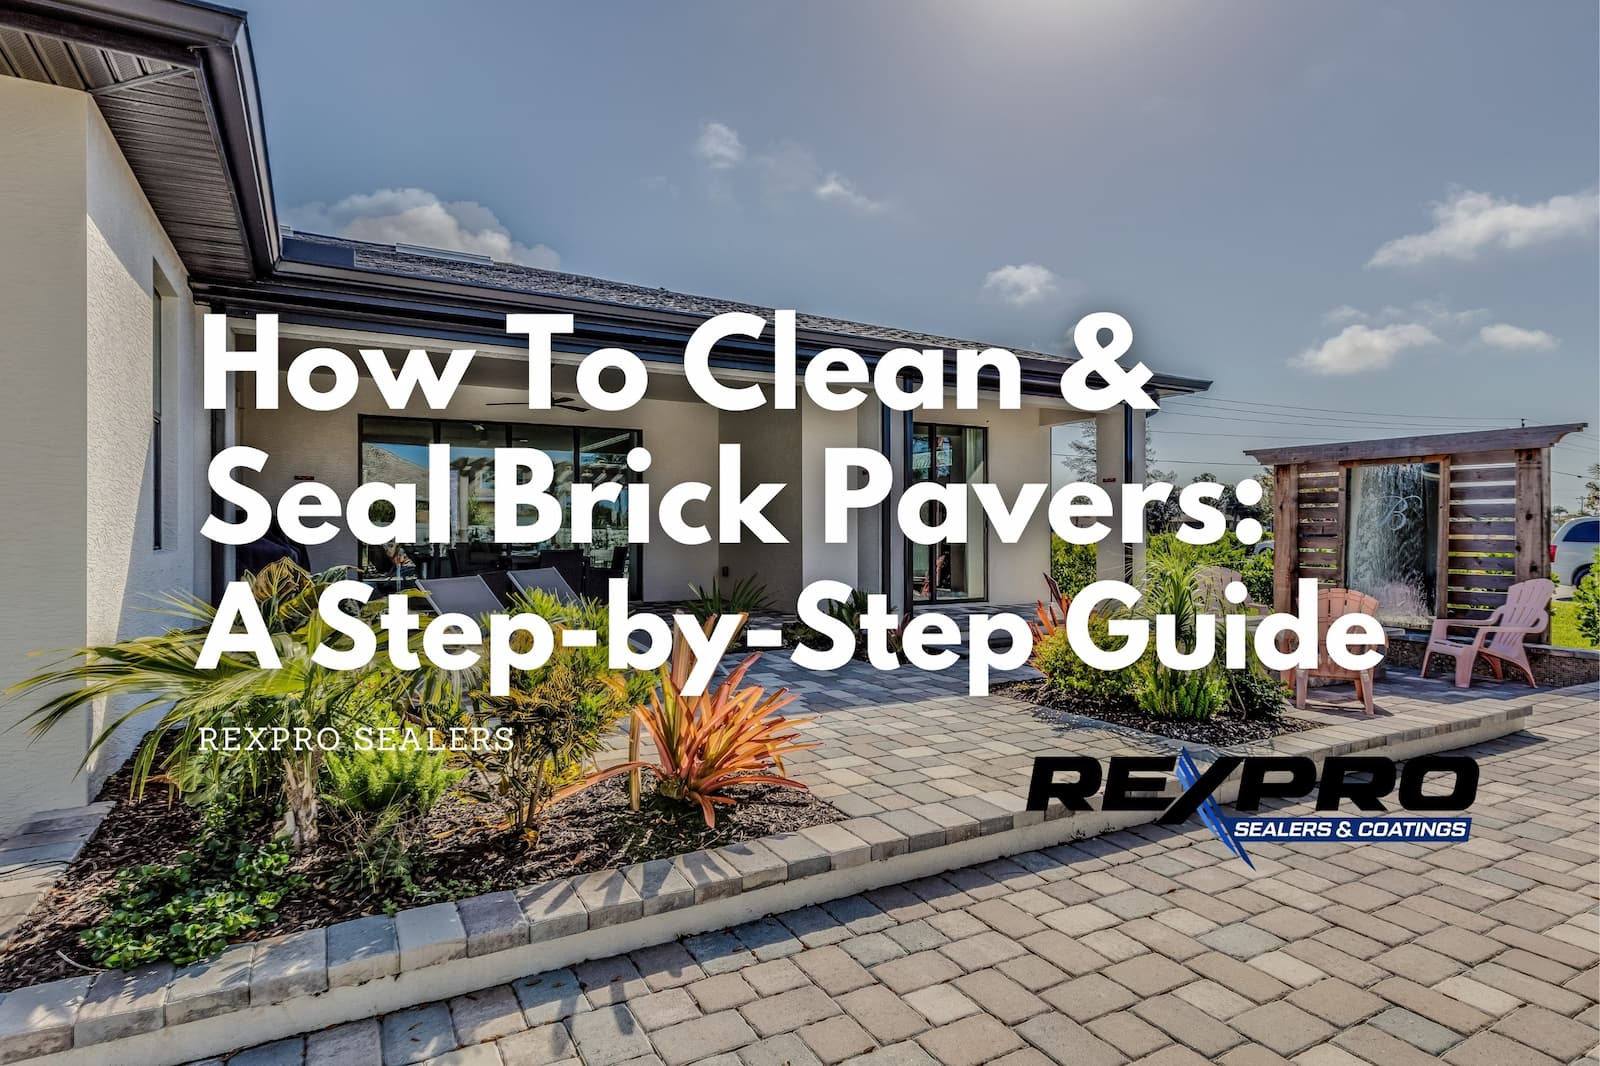 How-to-clean-and-seal-brick-pavers-a-step-by-step-guide